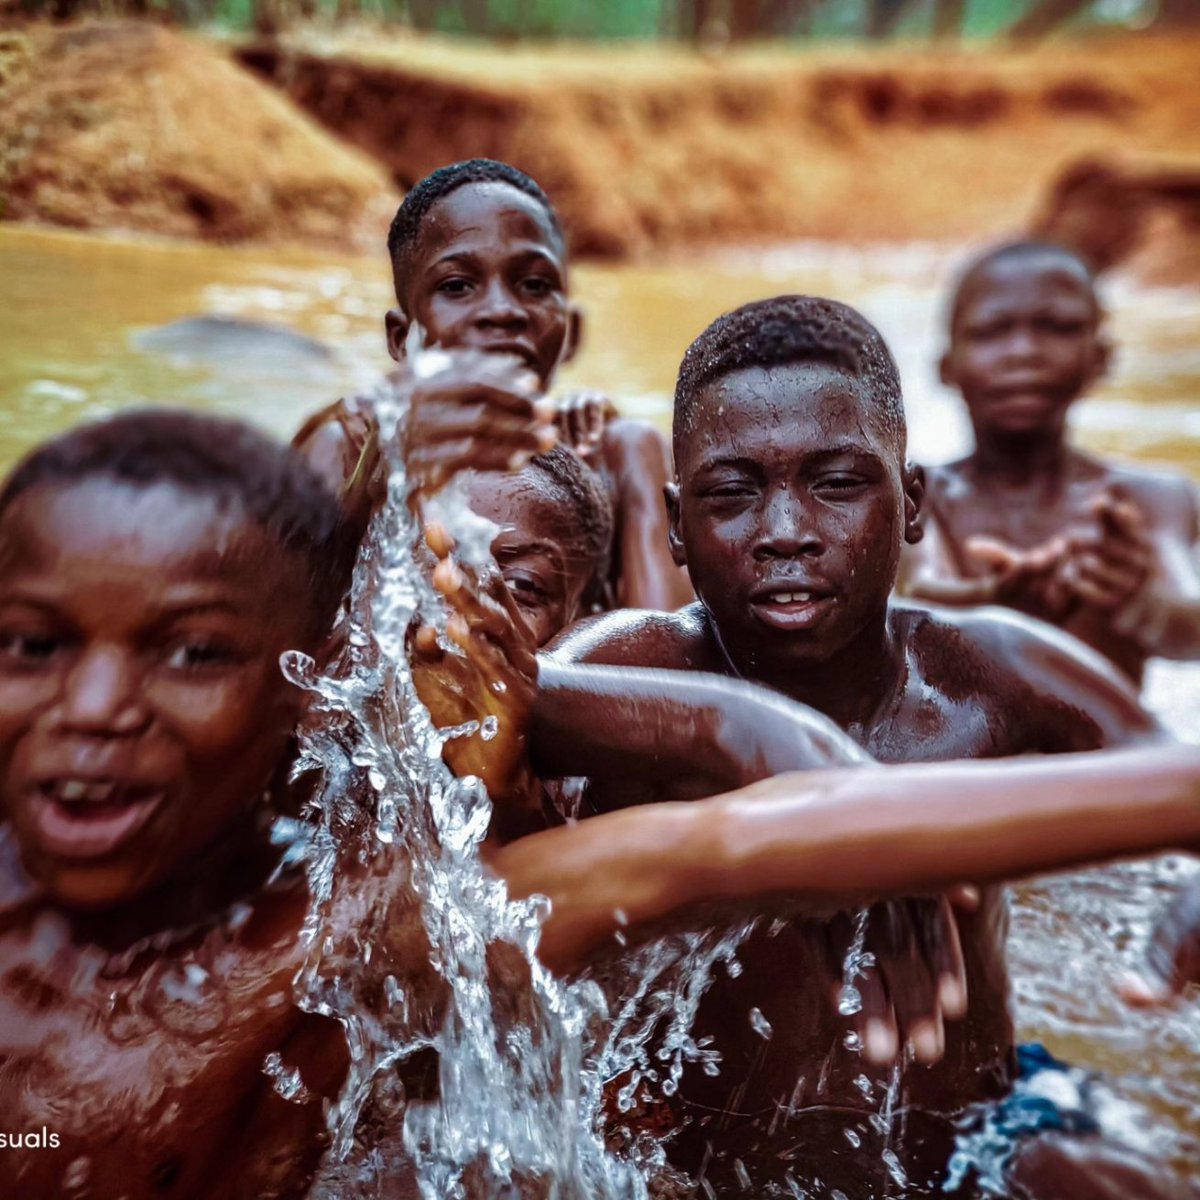 My iconic moments was with these kids at ekosodin river in Benin. These kids made me remember childhood memories which is  just to eat, play and sleep. But now it's quite different because now I'm older.
#shotonredminote
#EveryShotIconic @XiaomiNigeria

#EveryShotIconic